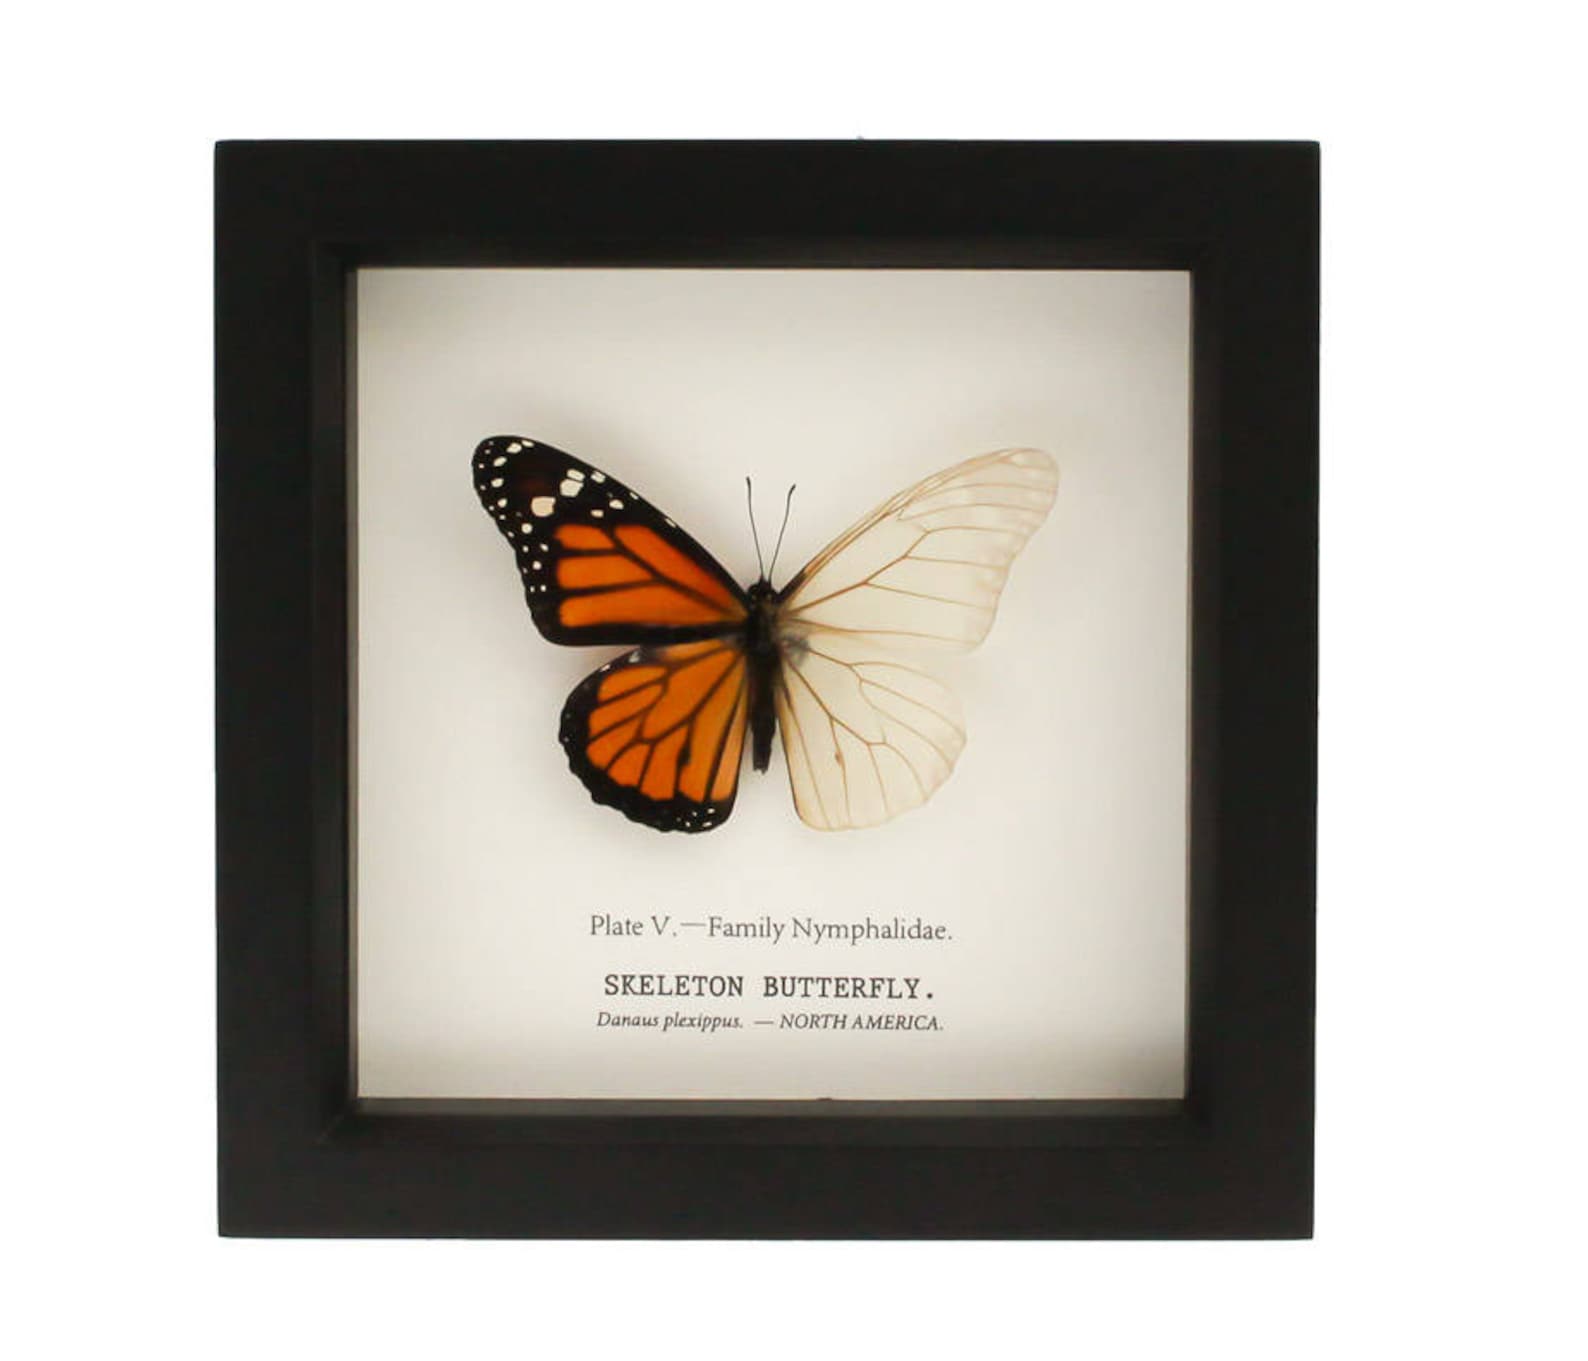 Real Monarch Butterfly Skeleton Science Oddity Curiosity - Etsy